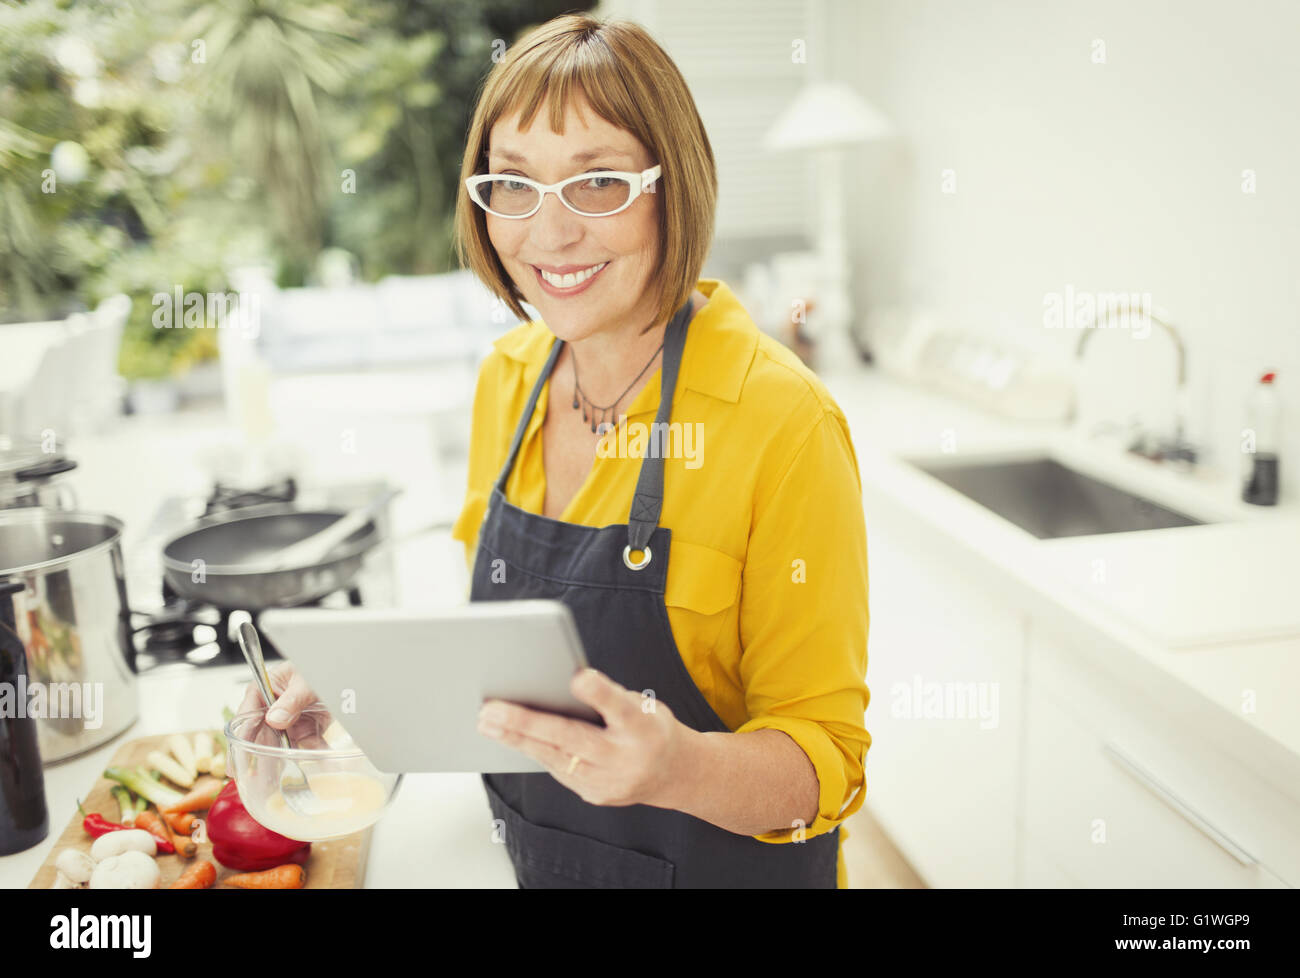 Portrait of smiling mature woman with digital tablet cooking in kitchen Banque D'Images